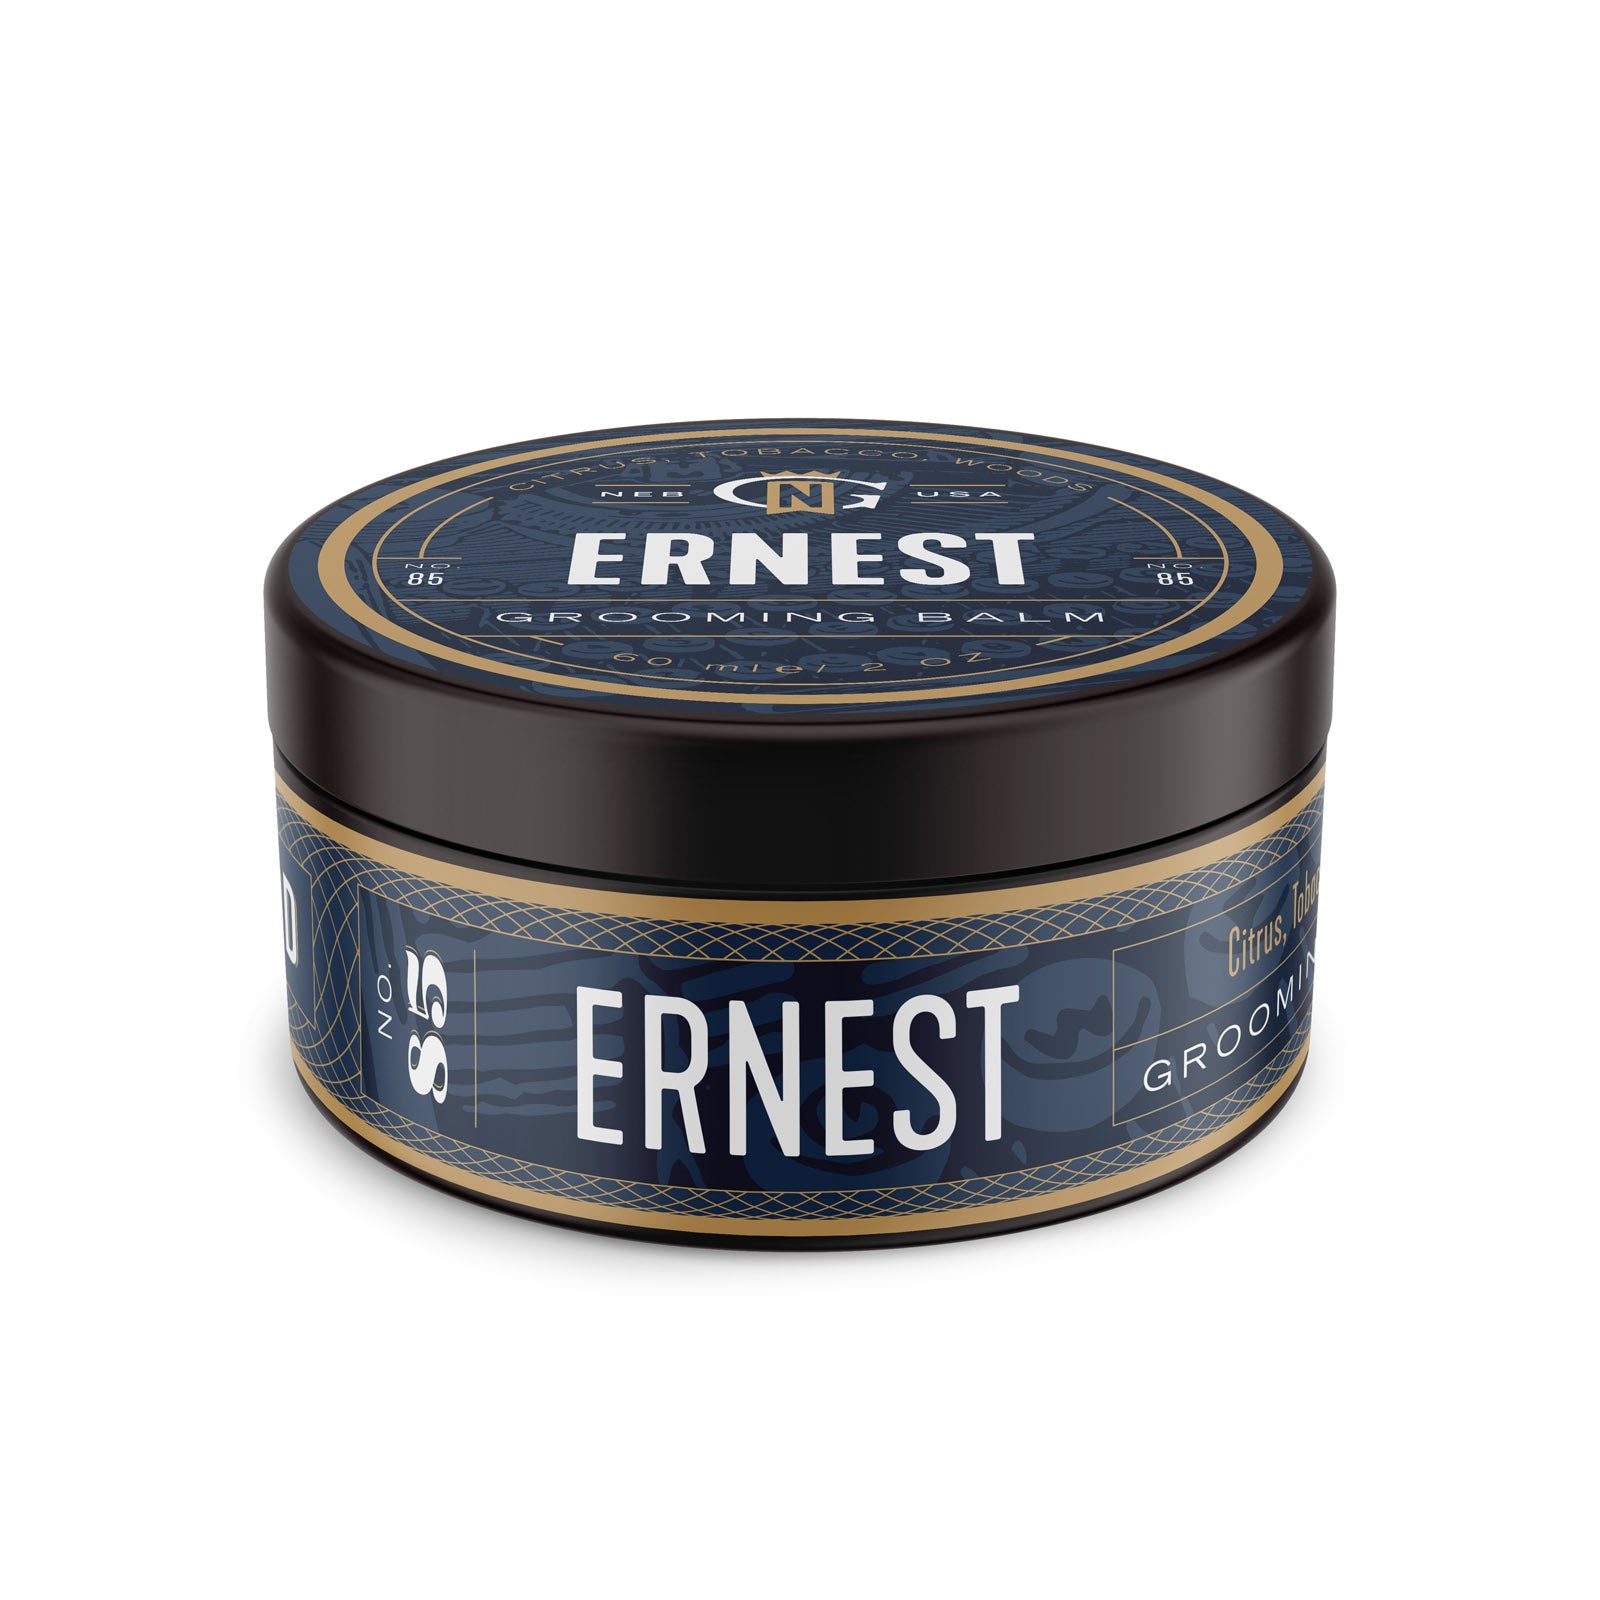 Ernest Grooming Balm